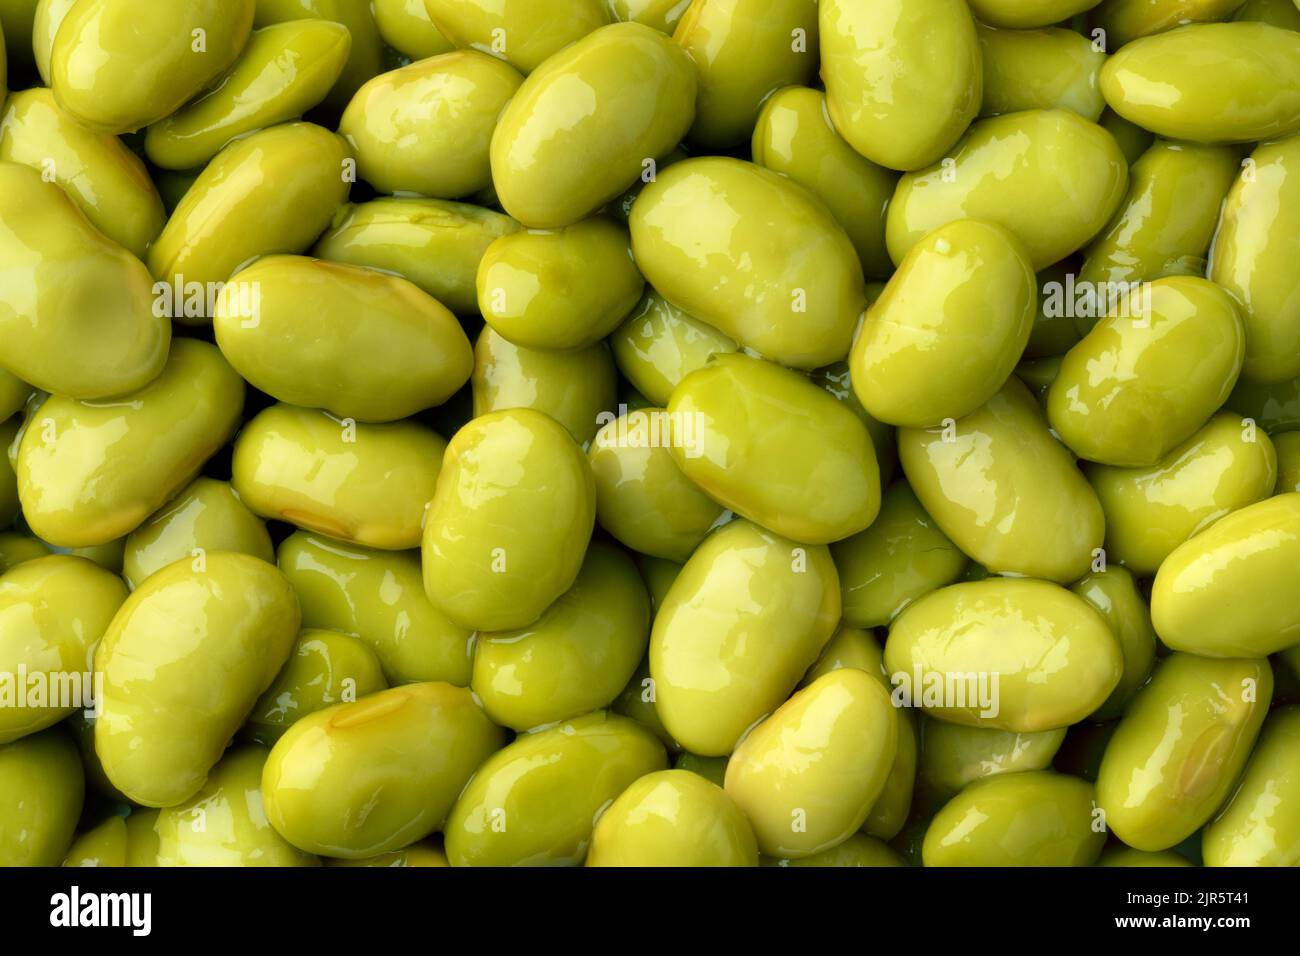 Preserved steamed edamame beans close up full frame as background Stock Photo